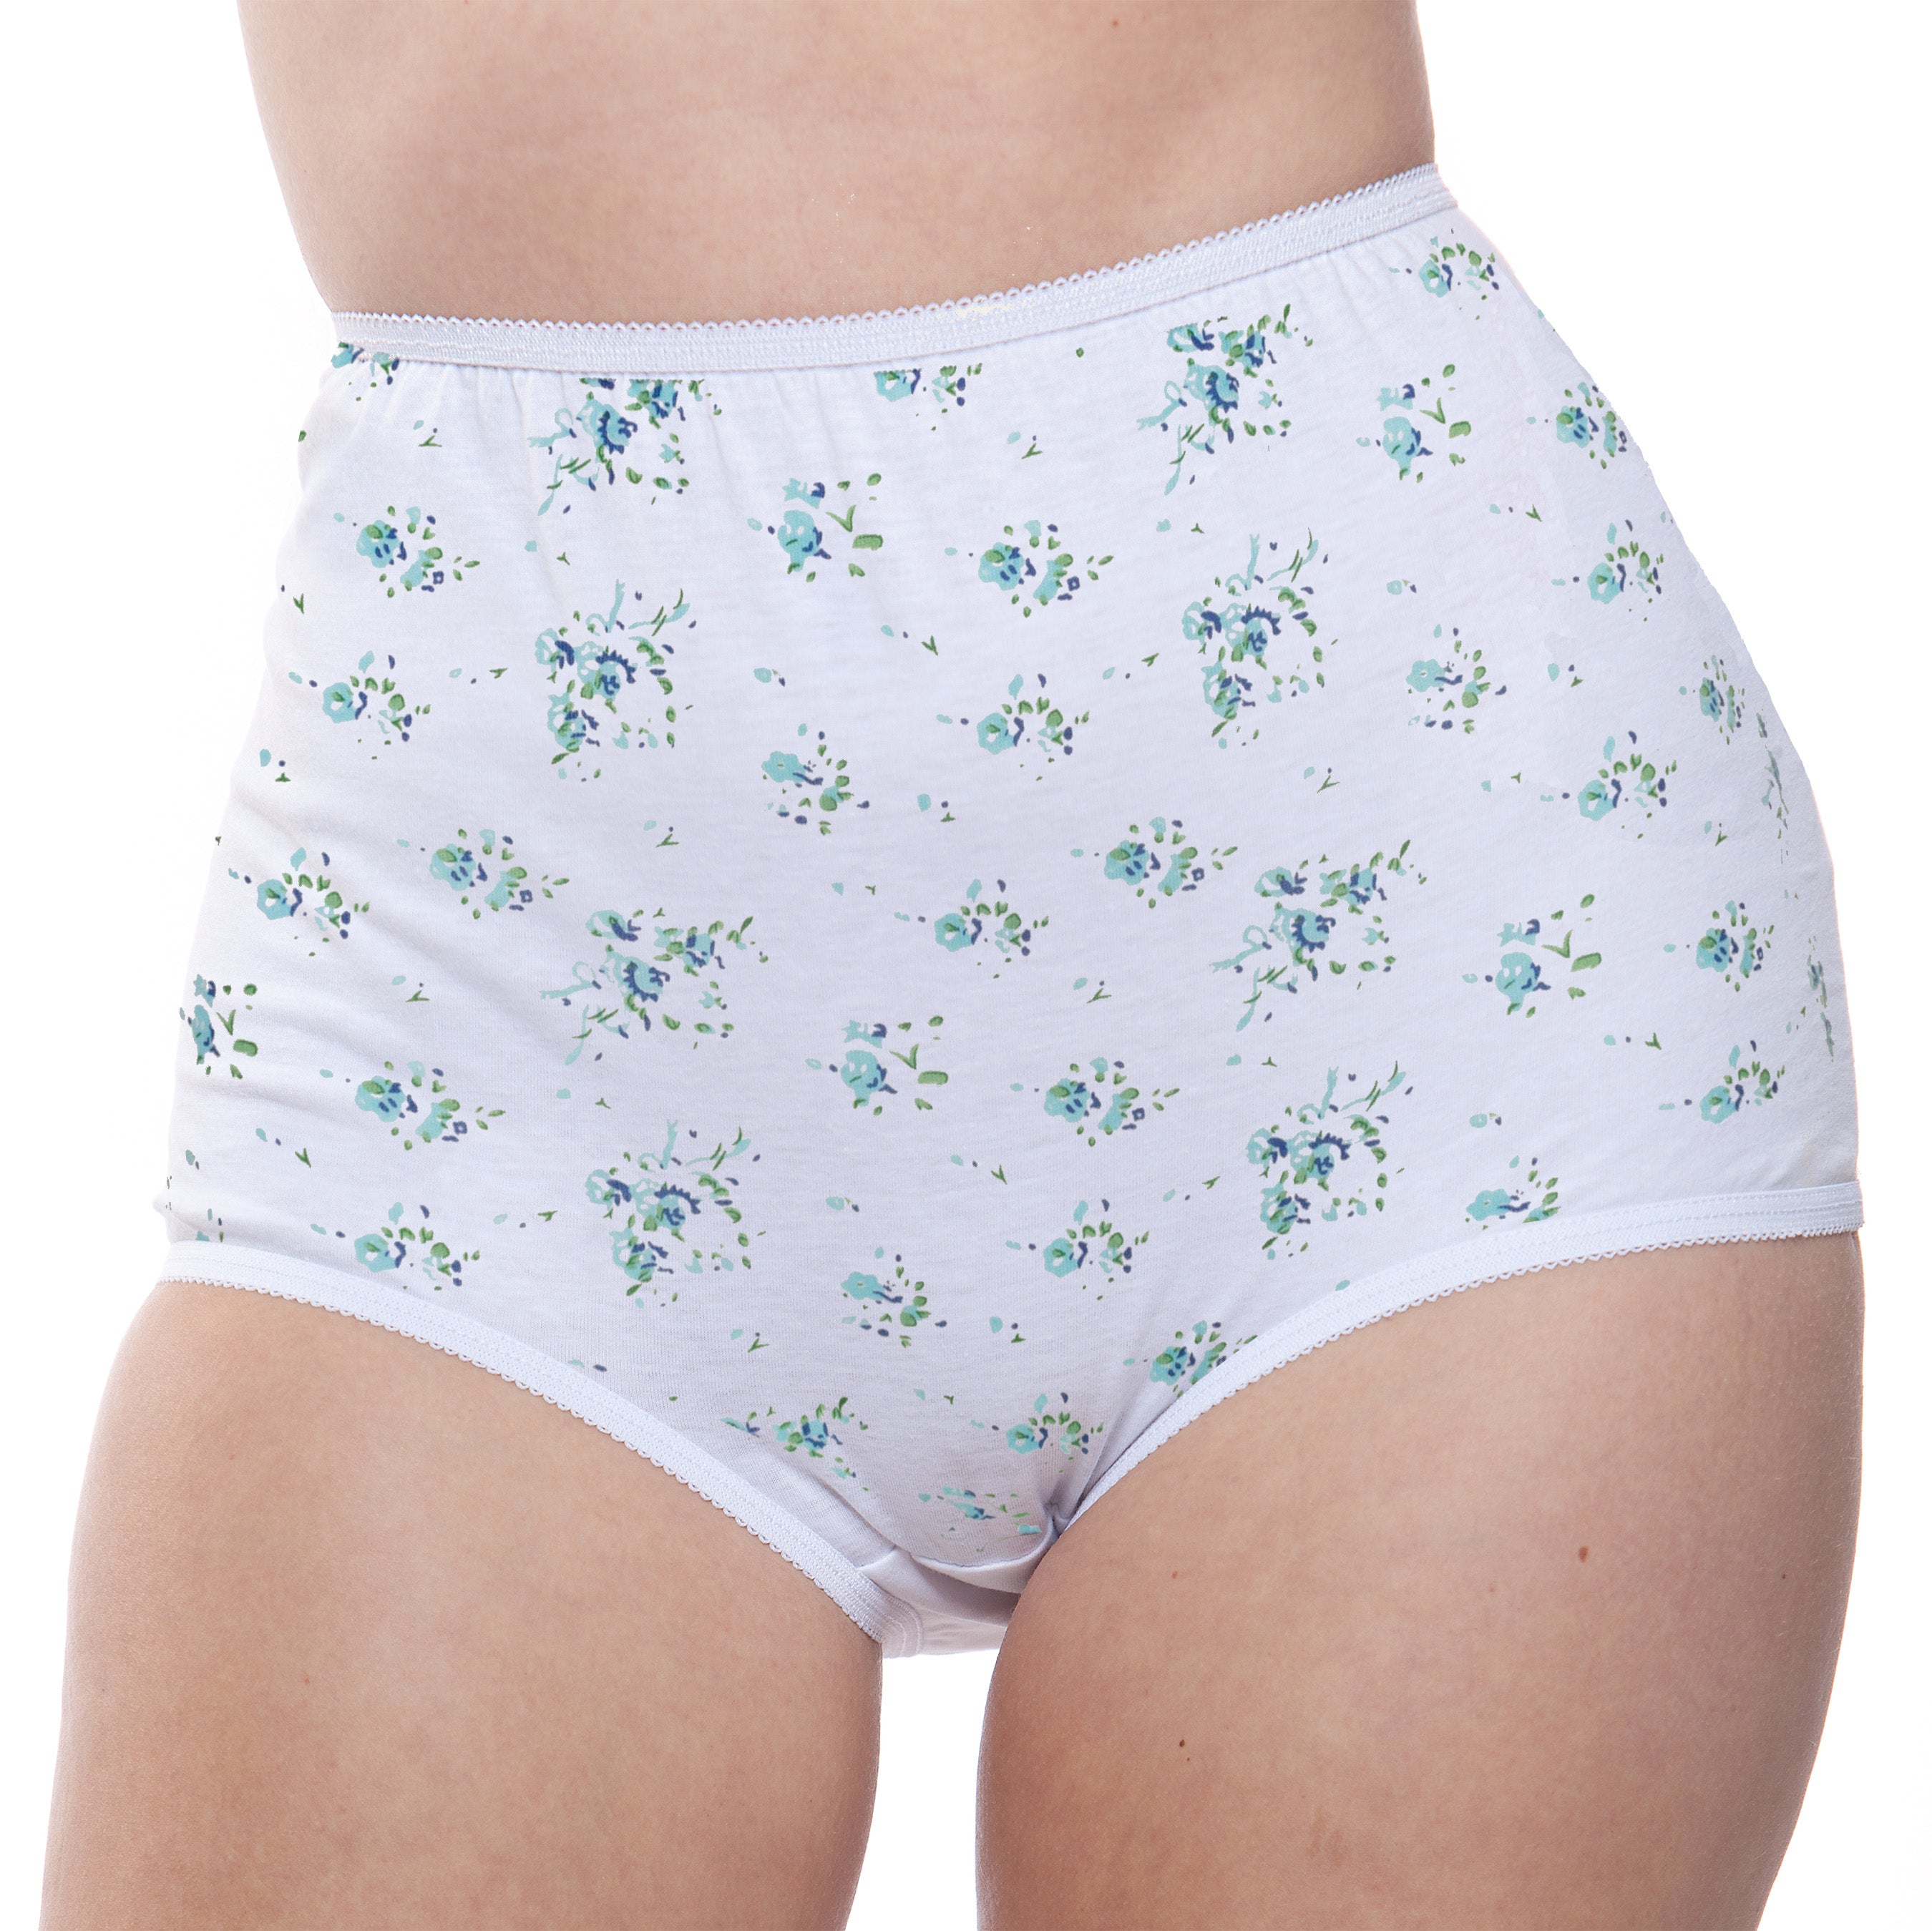 Full Coverage Panty Floral Print 6 Pack (100% Cotton)